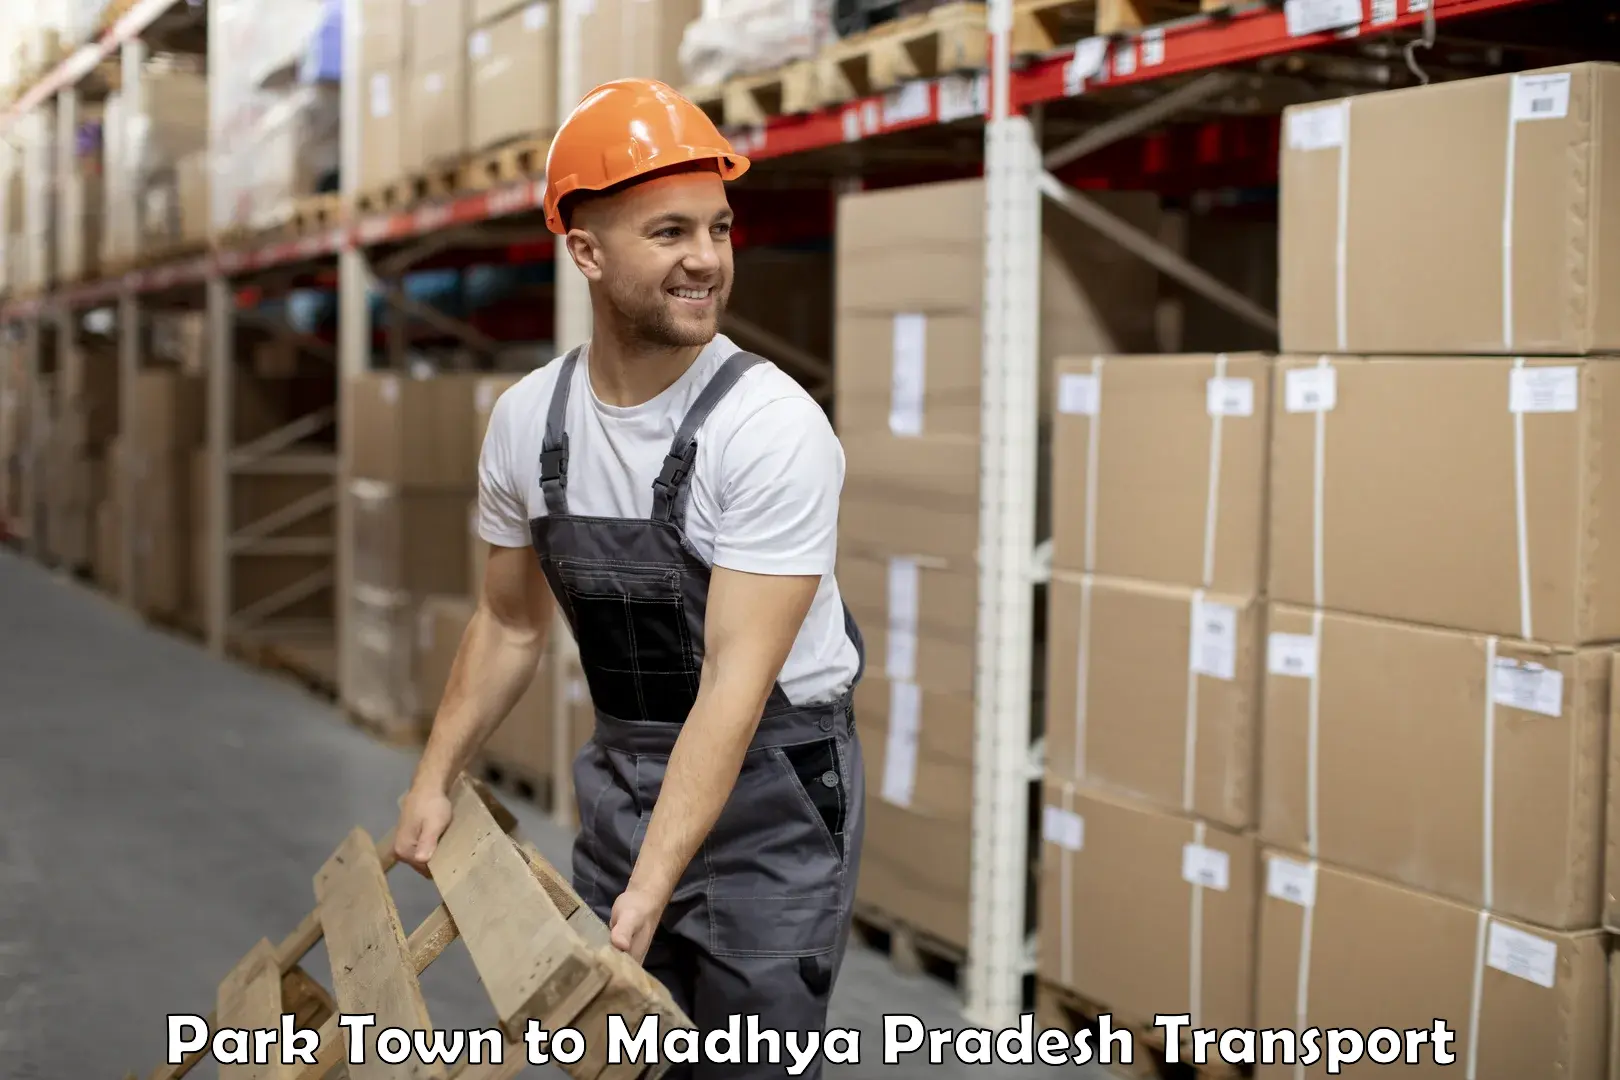 Material transport services Park Town to Madhya Pradesh